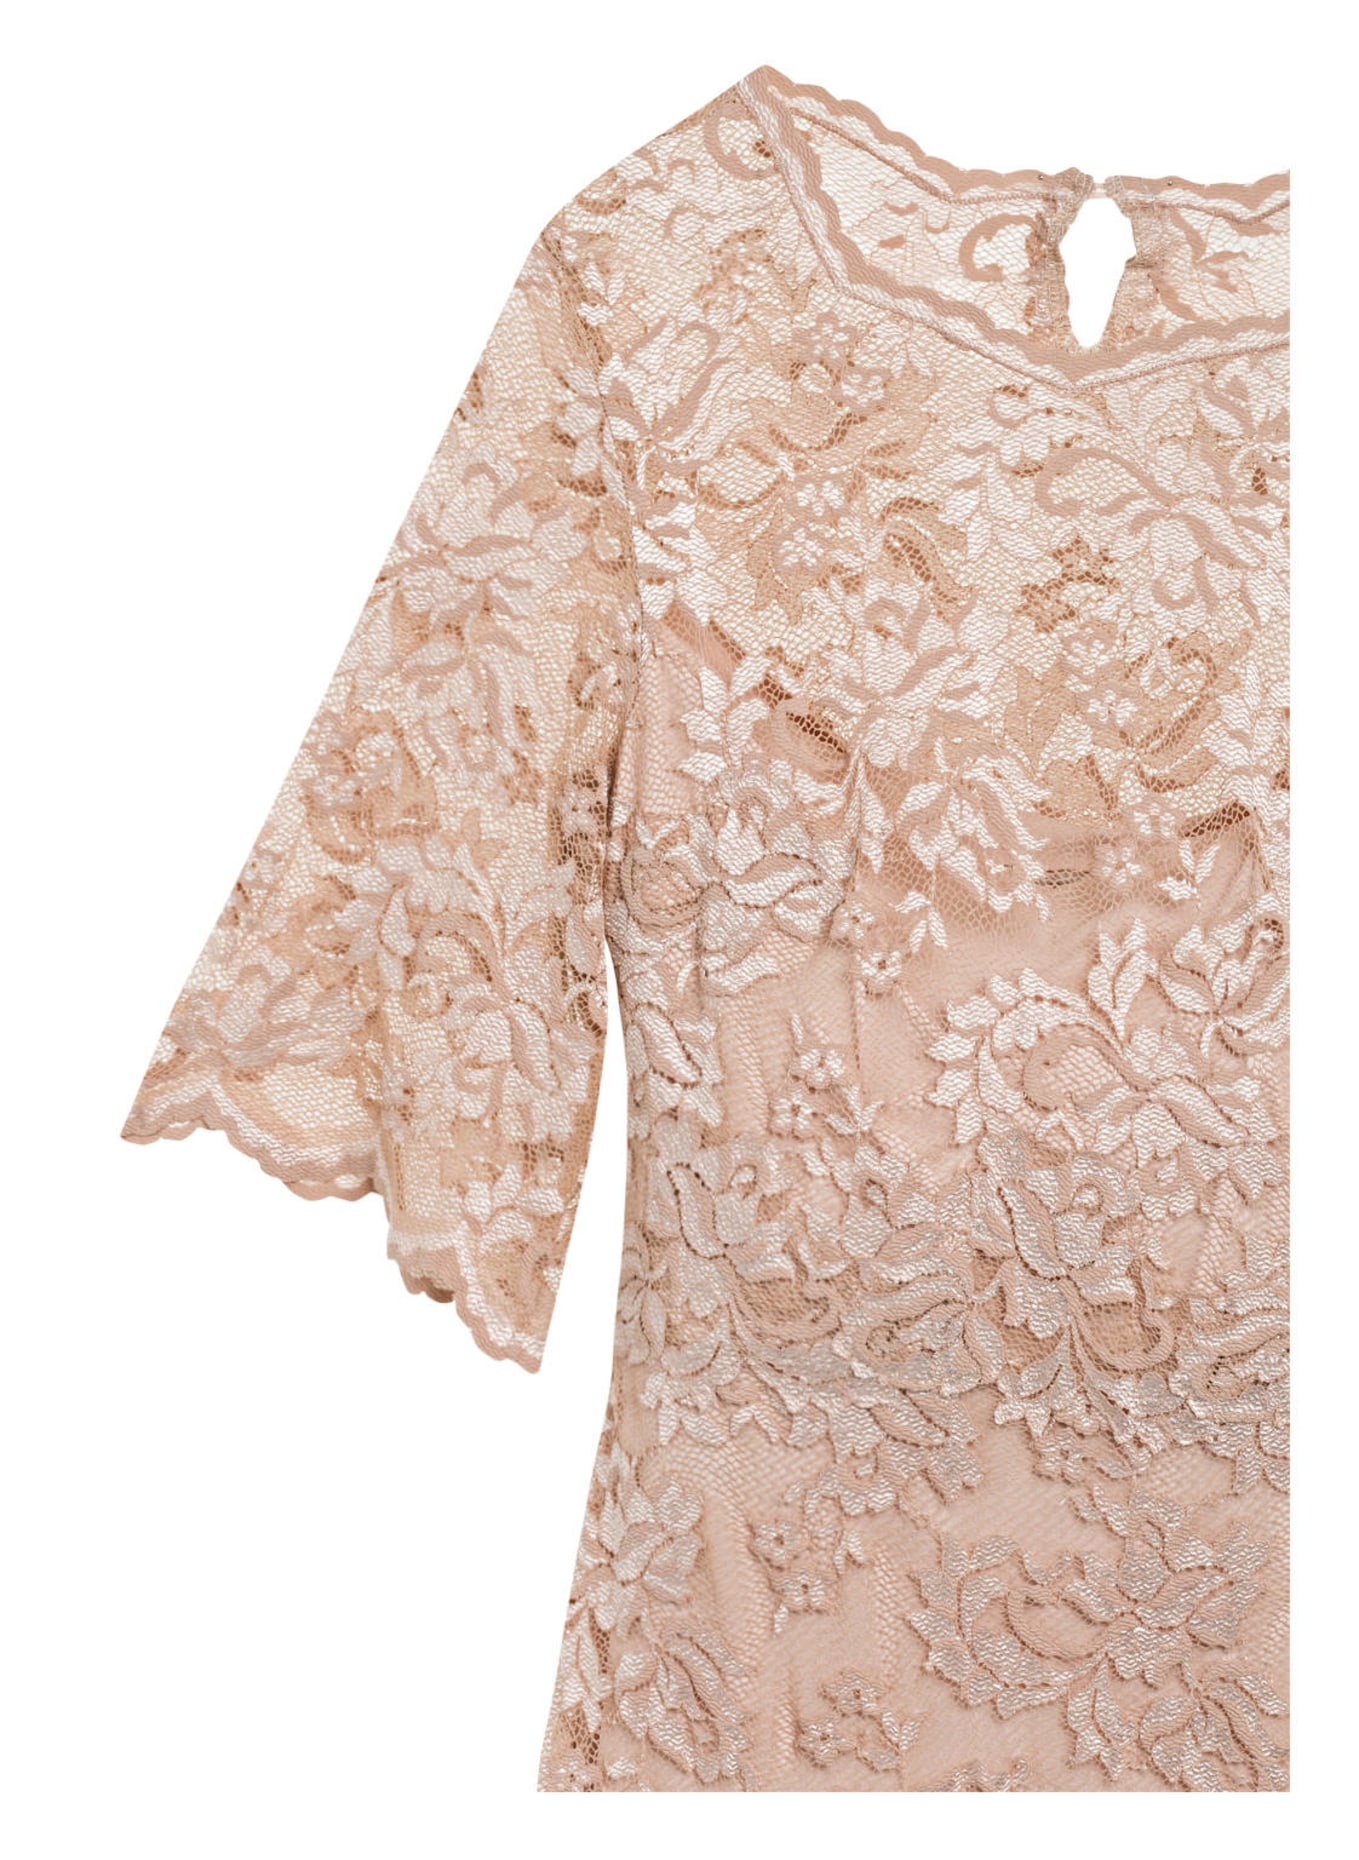 OLVI'S Lace dress with 3/4 sleeve, Color: NUDE (Image 3)